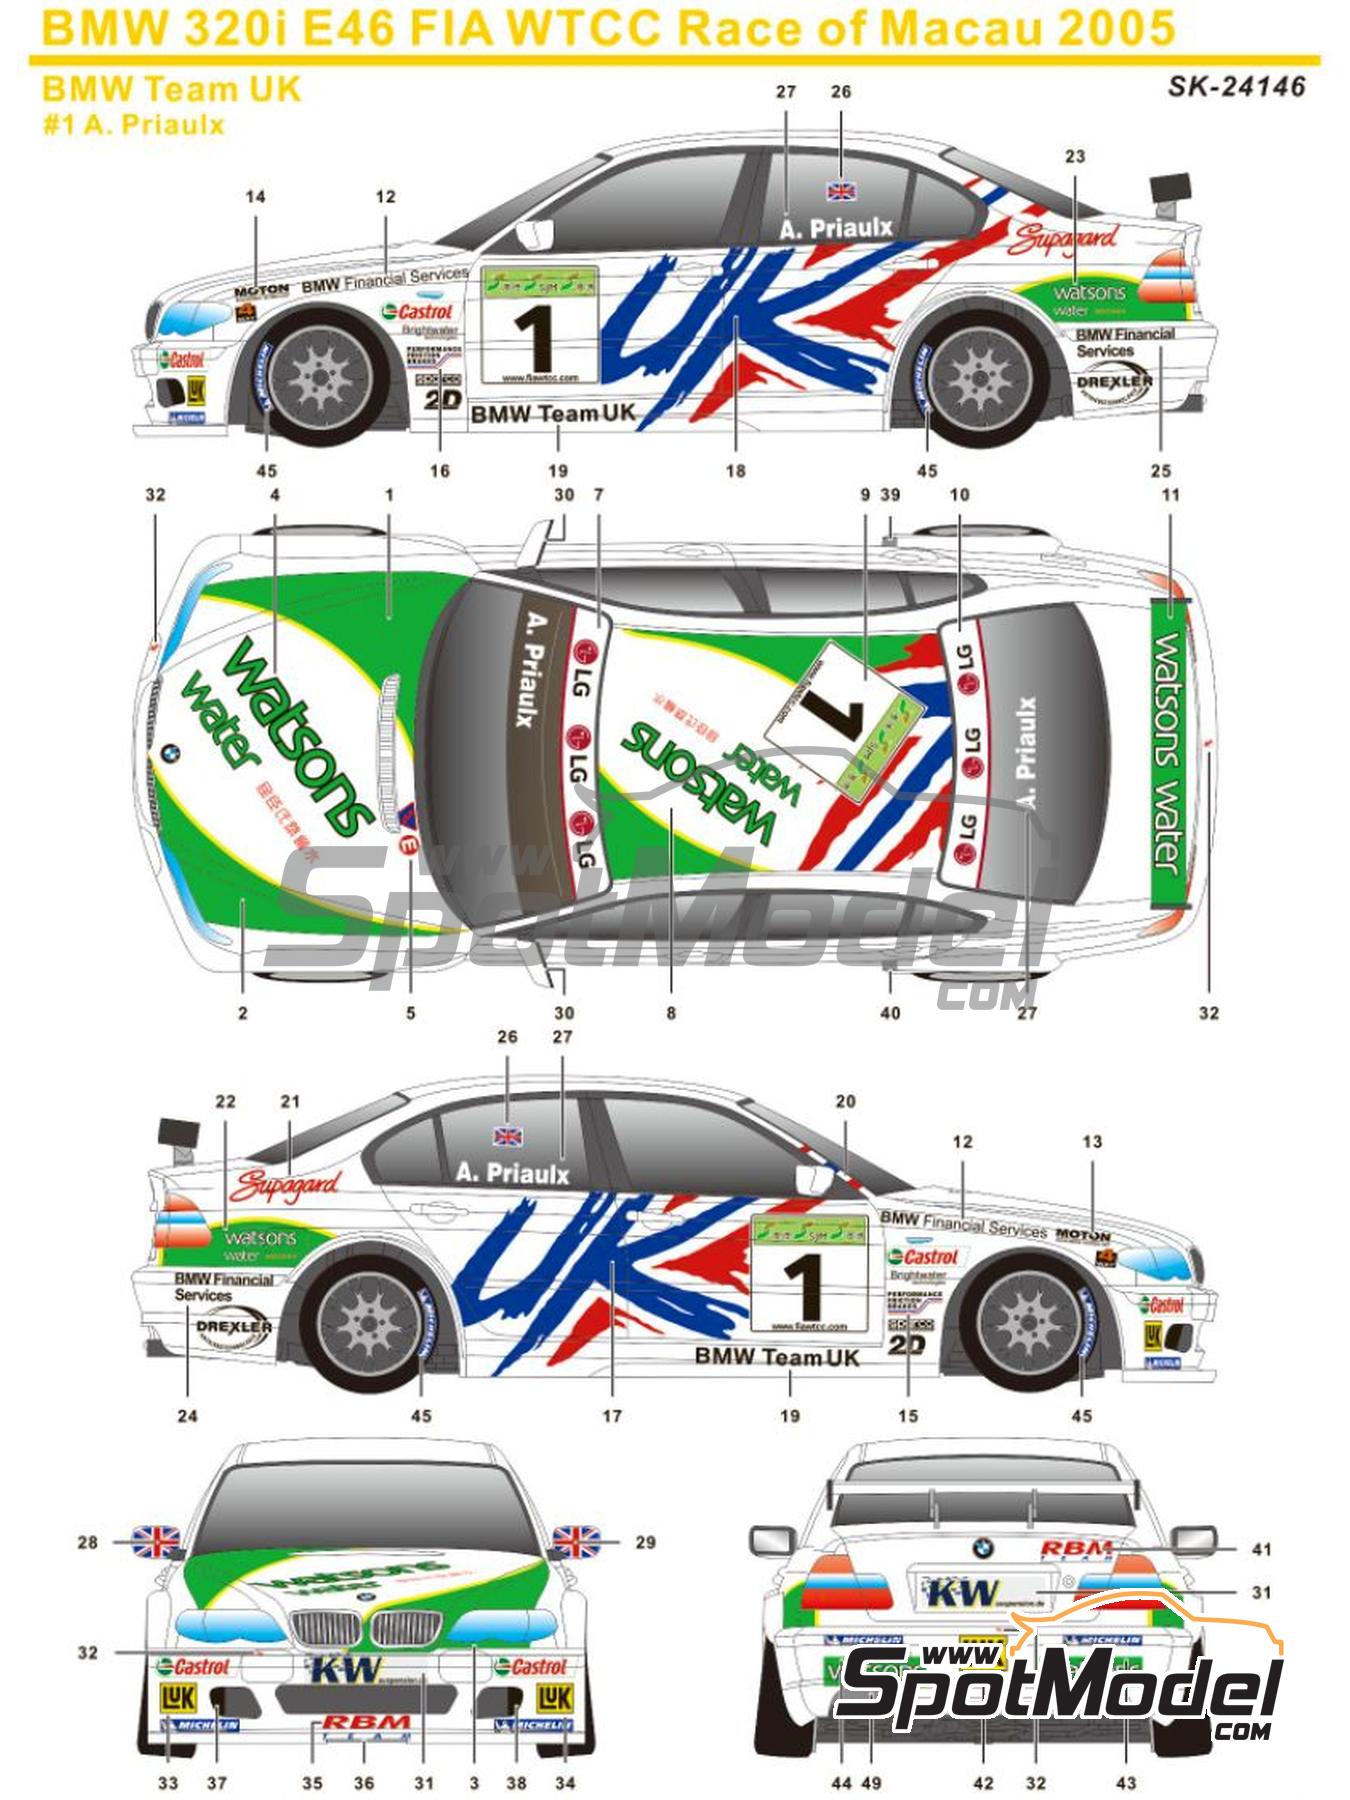 BMW 320i E46 BMW UK Team sponsored by Watsons water - Guia Race of Macau  2005. Marking / livery in 1/24 scale manufactured by SK Decals (ref.  SK-24146